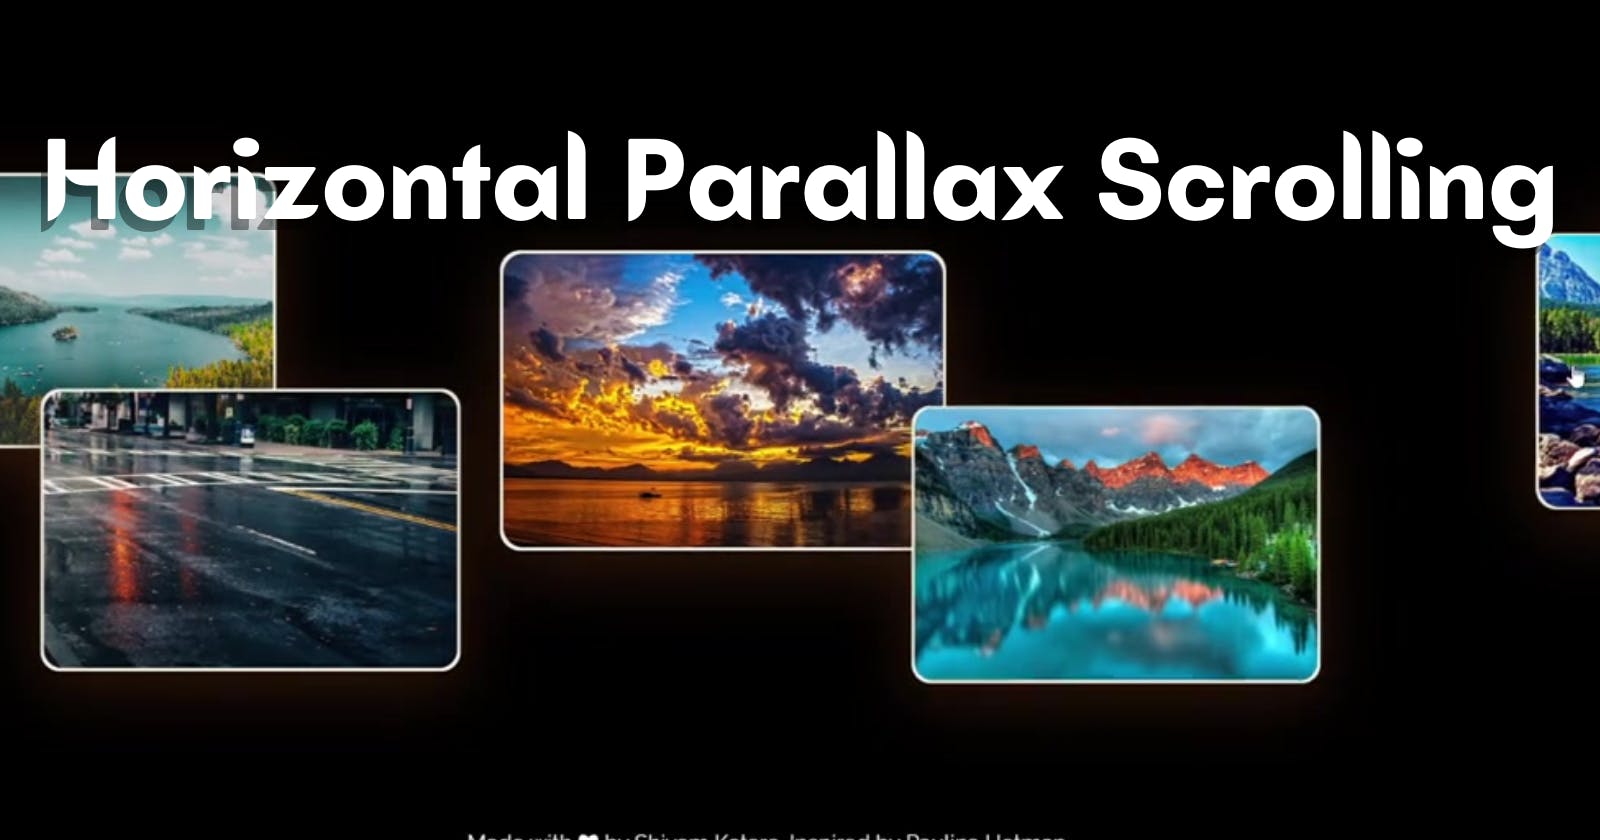 How to Create Horizontal Parallax Scrolling using CSS and JavaScript